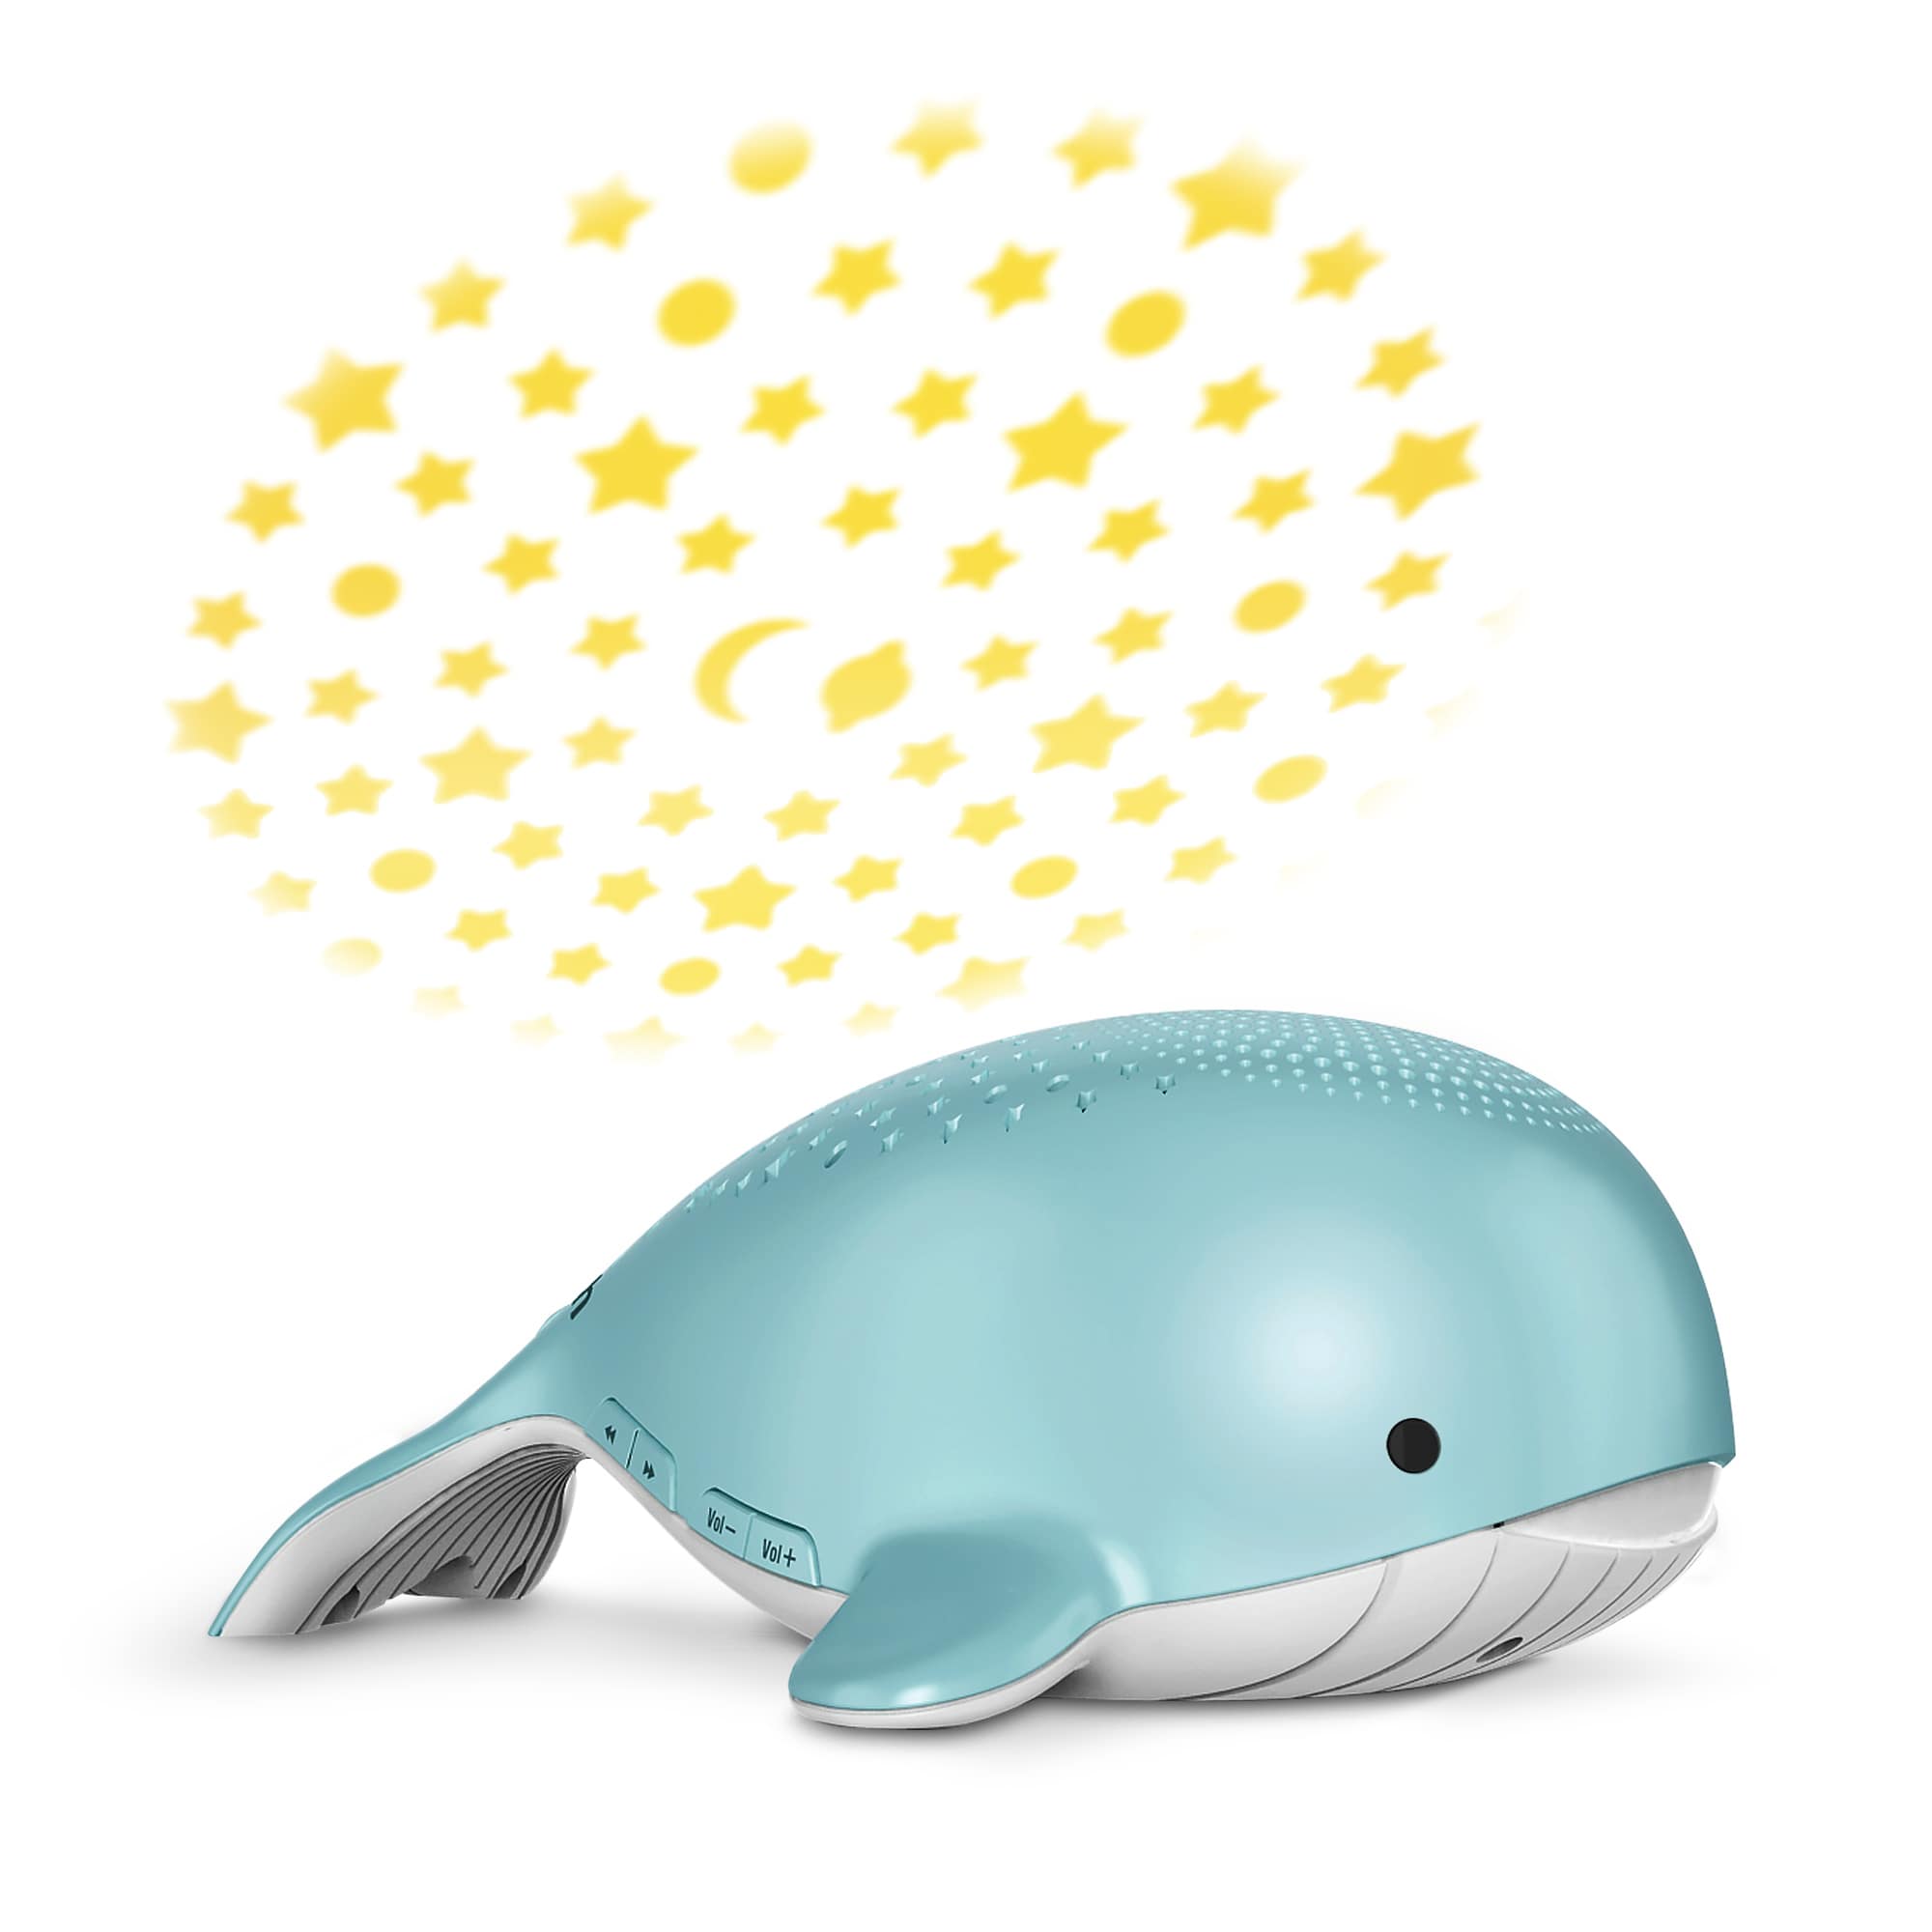 Wyatt the Whale® Storytelling Soother - view 1